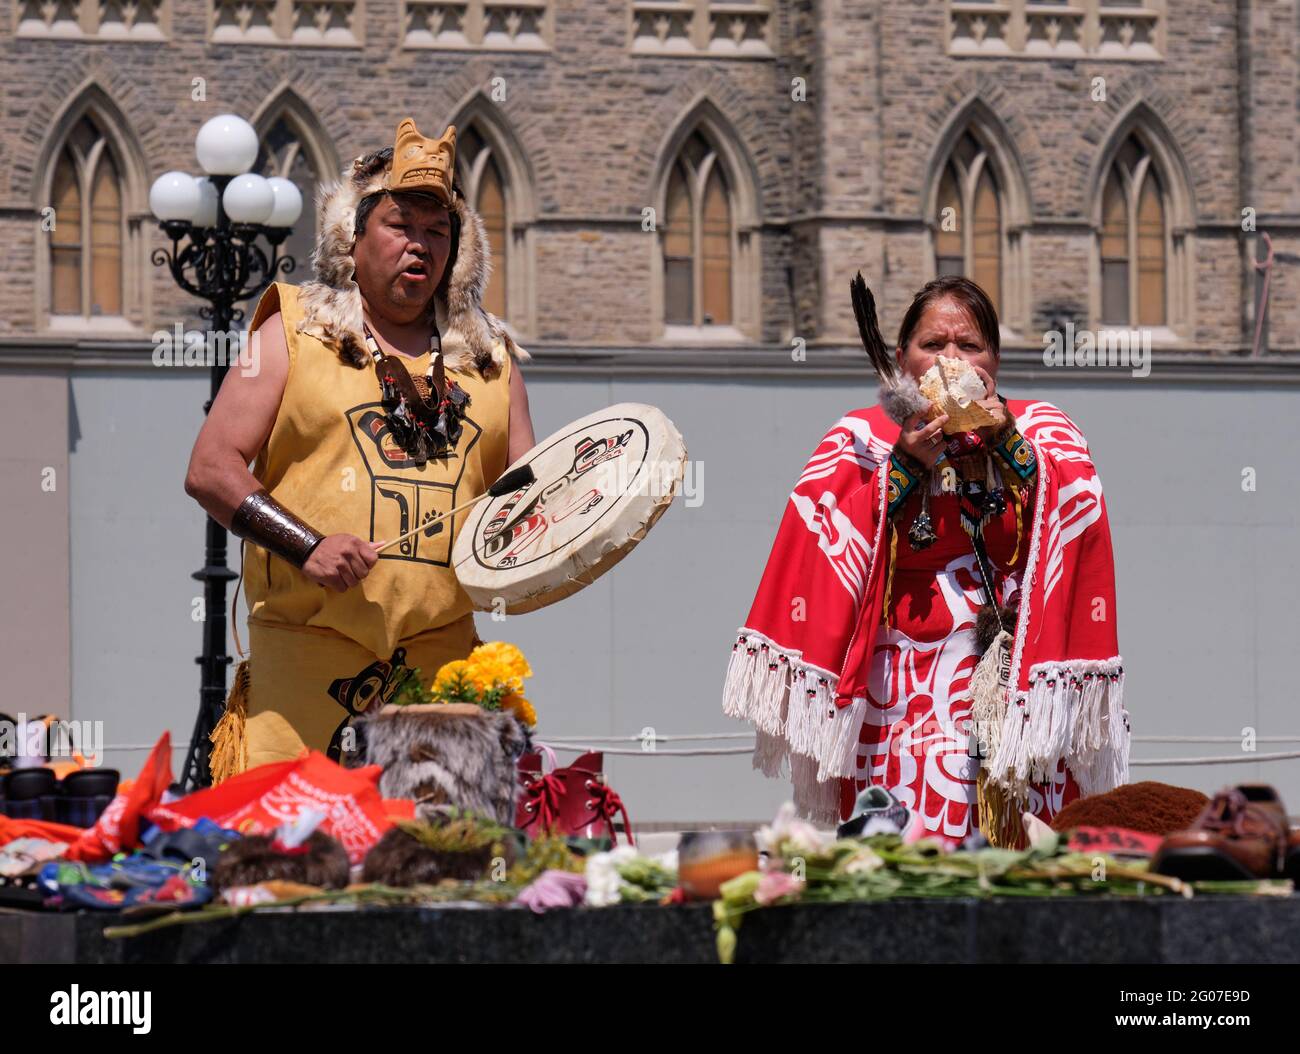 Ottawa, Canada. June 1st, 2021. A native couple perform a drum ceremony as Members of First Nations communities honour the memory of the 215 children found buried at a former Kamloops, British Colombia residential school at a memorial in front of the Canadian Parliament. Credit: meanderingemu/Alamy Live News Stock Photo